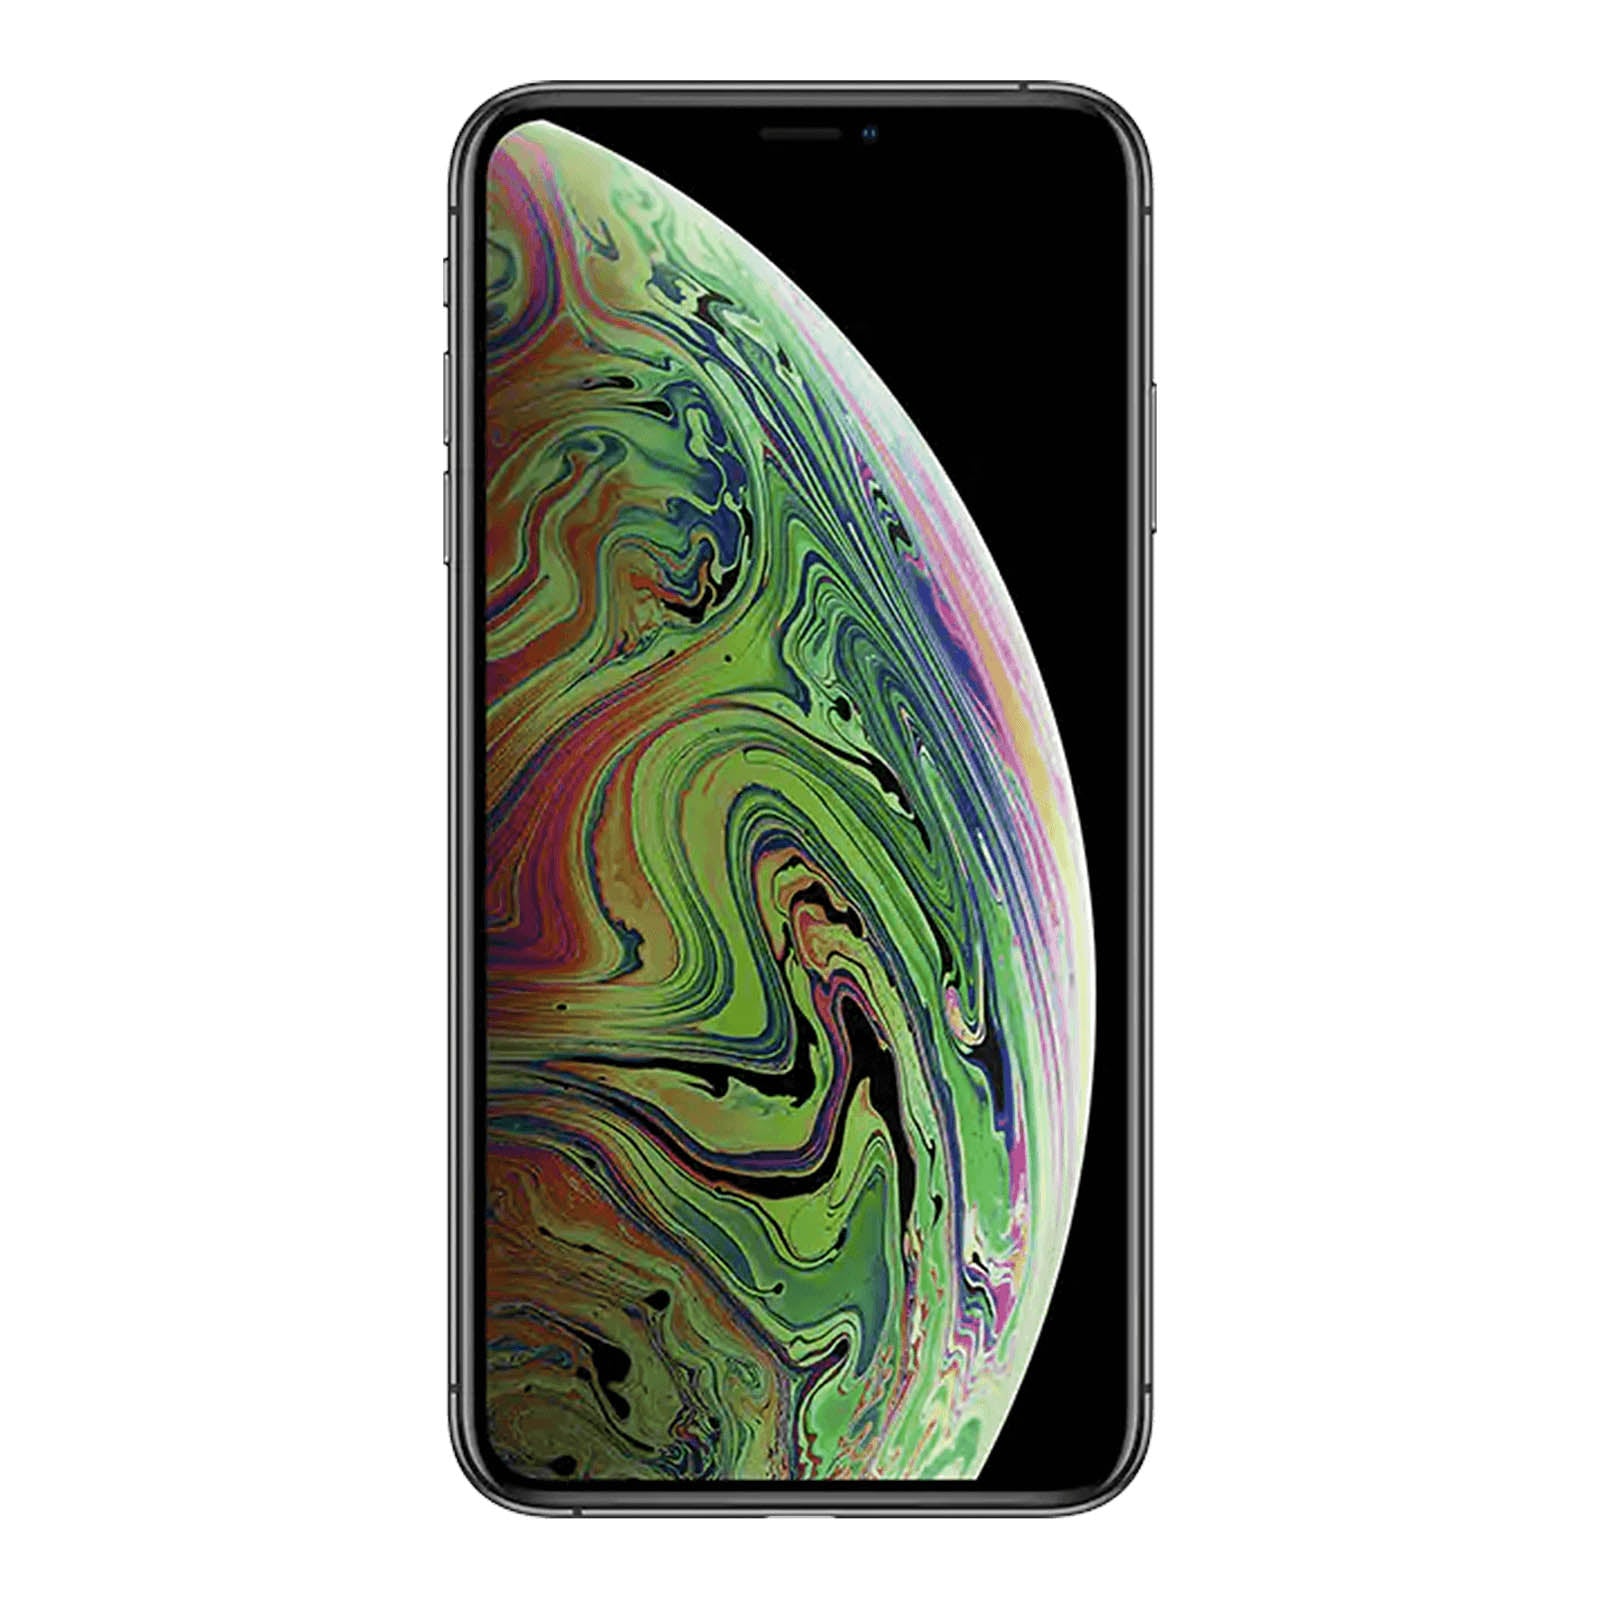 Apple iPhone XS Max 512GB Space Grey Very Good - T-Mobile